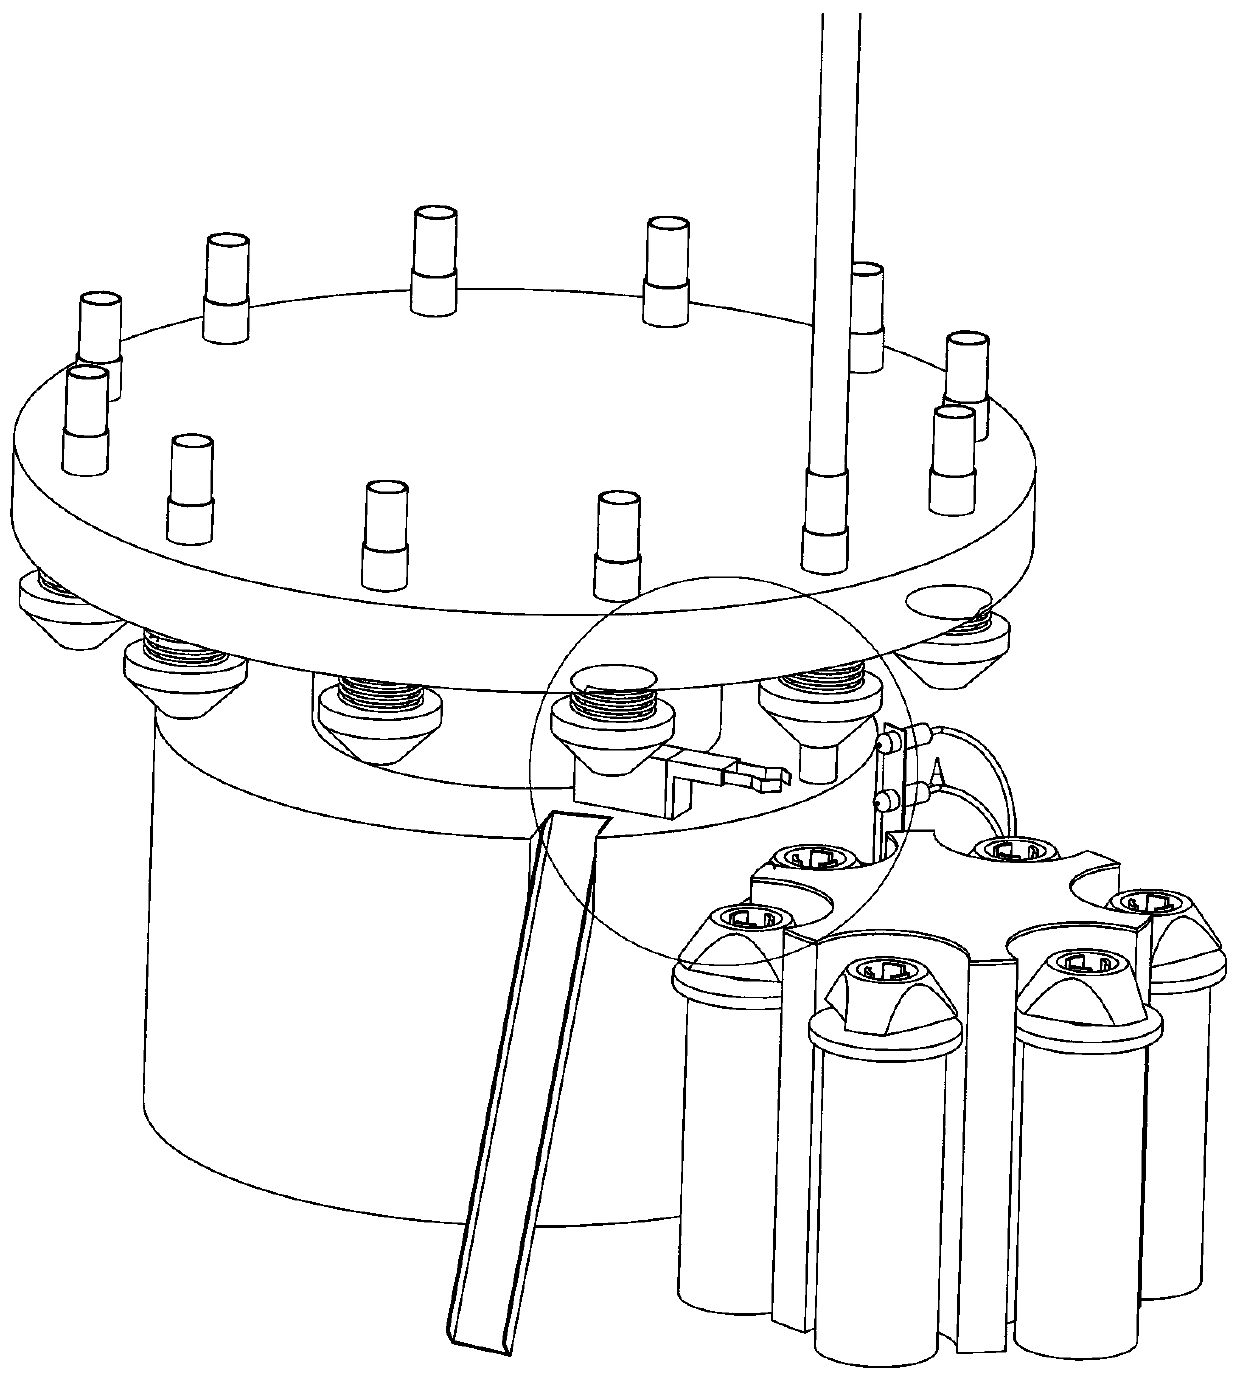 Rejecting apparatus with automatic glass tube head clamping function